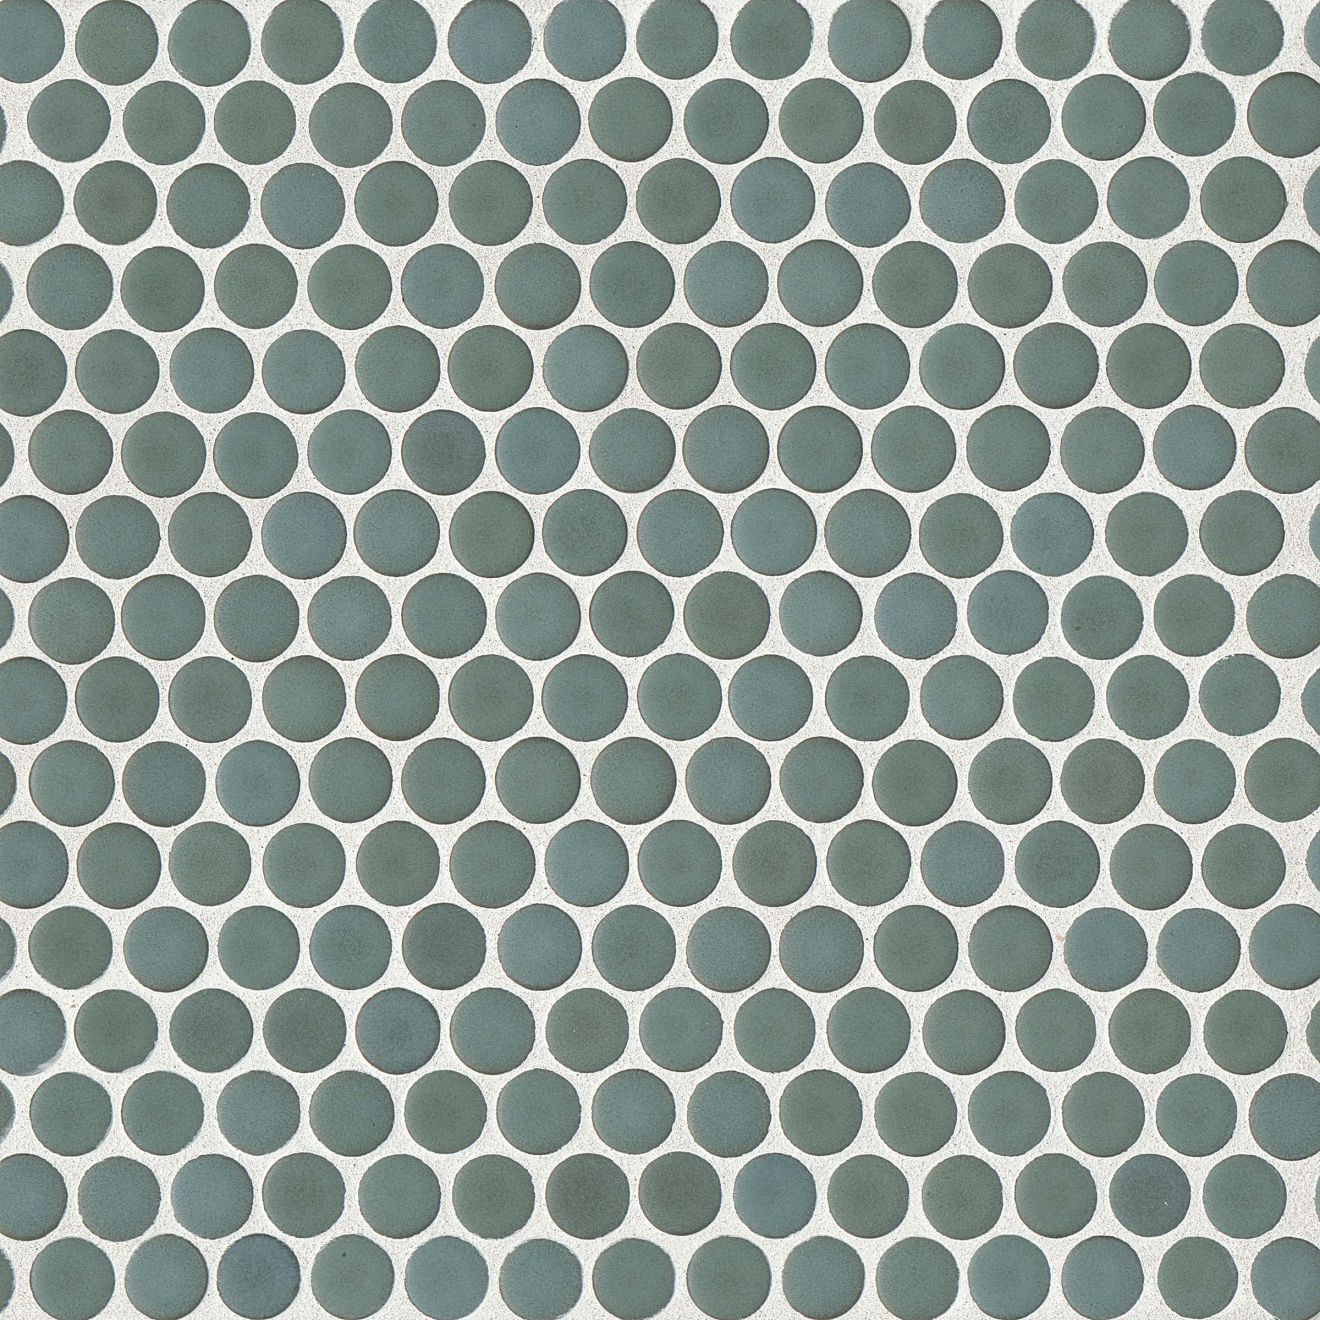 Silver sage green penny shaped mosaic tile on a beige background.